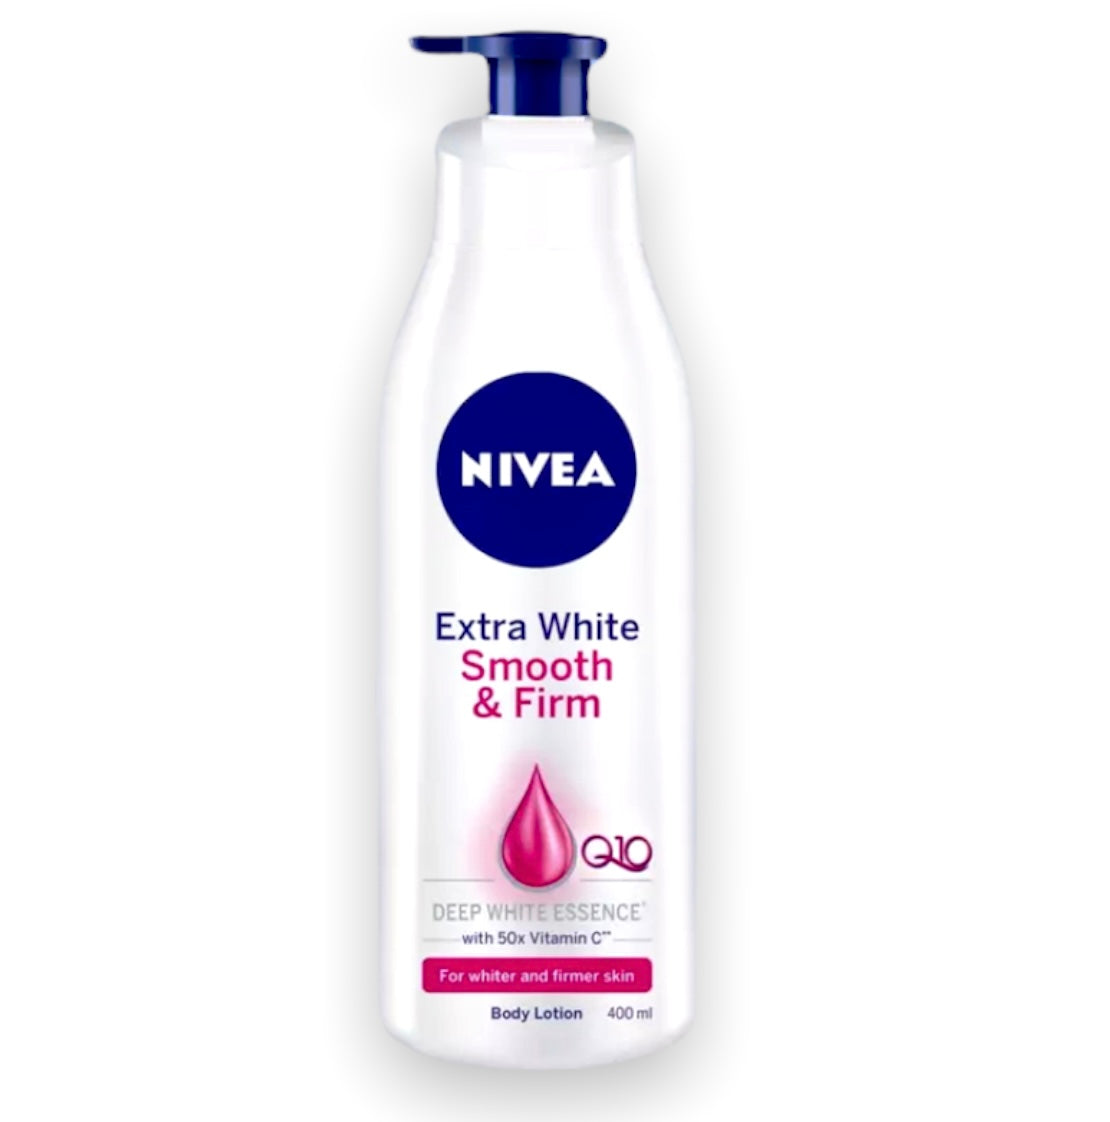 Nivea Extra White Smooth & Firm - Deep white essence with 50x Vit C Lotion